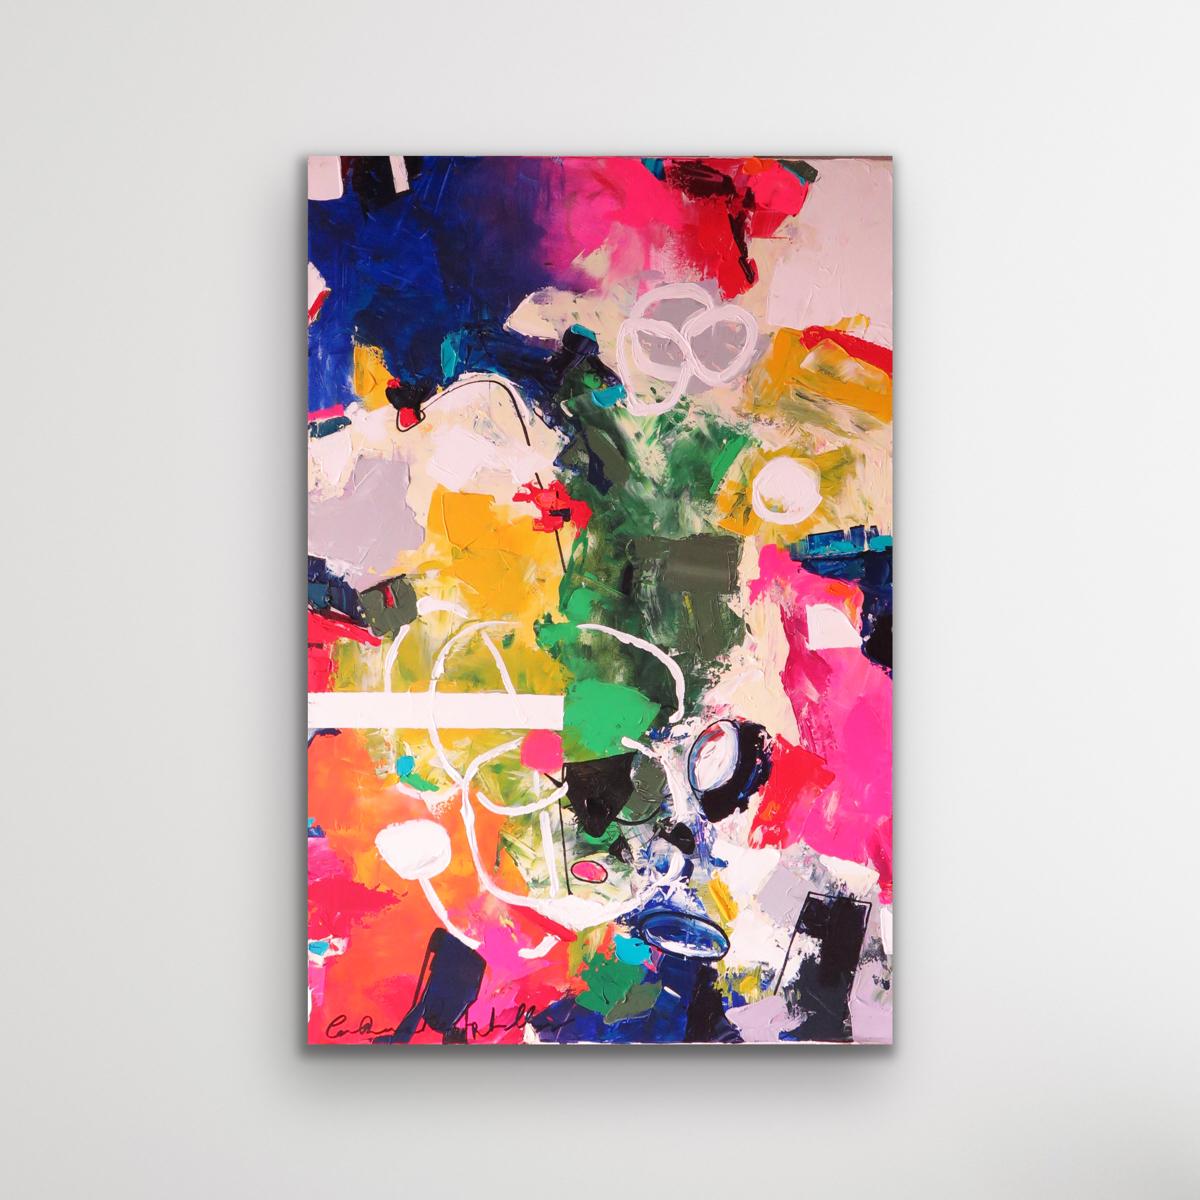 Florus is an original abstract painting by Catherine Pennington-Meyer. The title of this piece means ‘bright’ or ‘rich’ in Latin. A vibrant expressionist abstract full of energy. It will bring a splash of positivity and colour to any